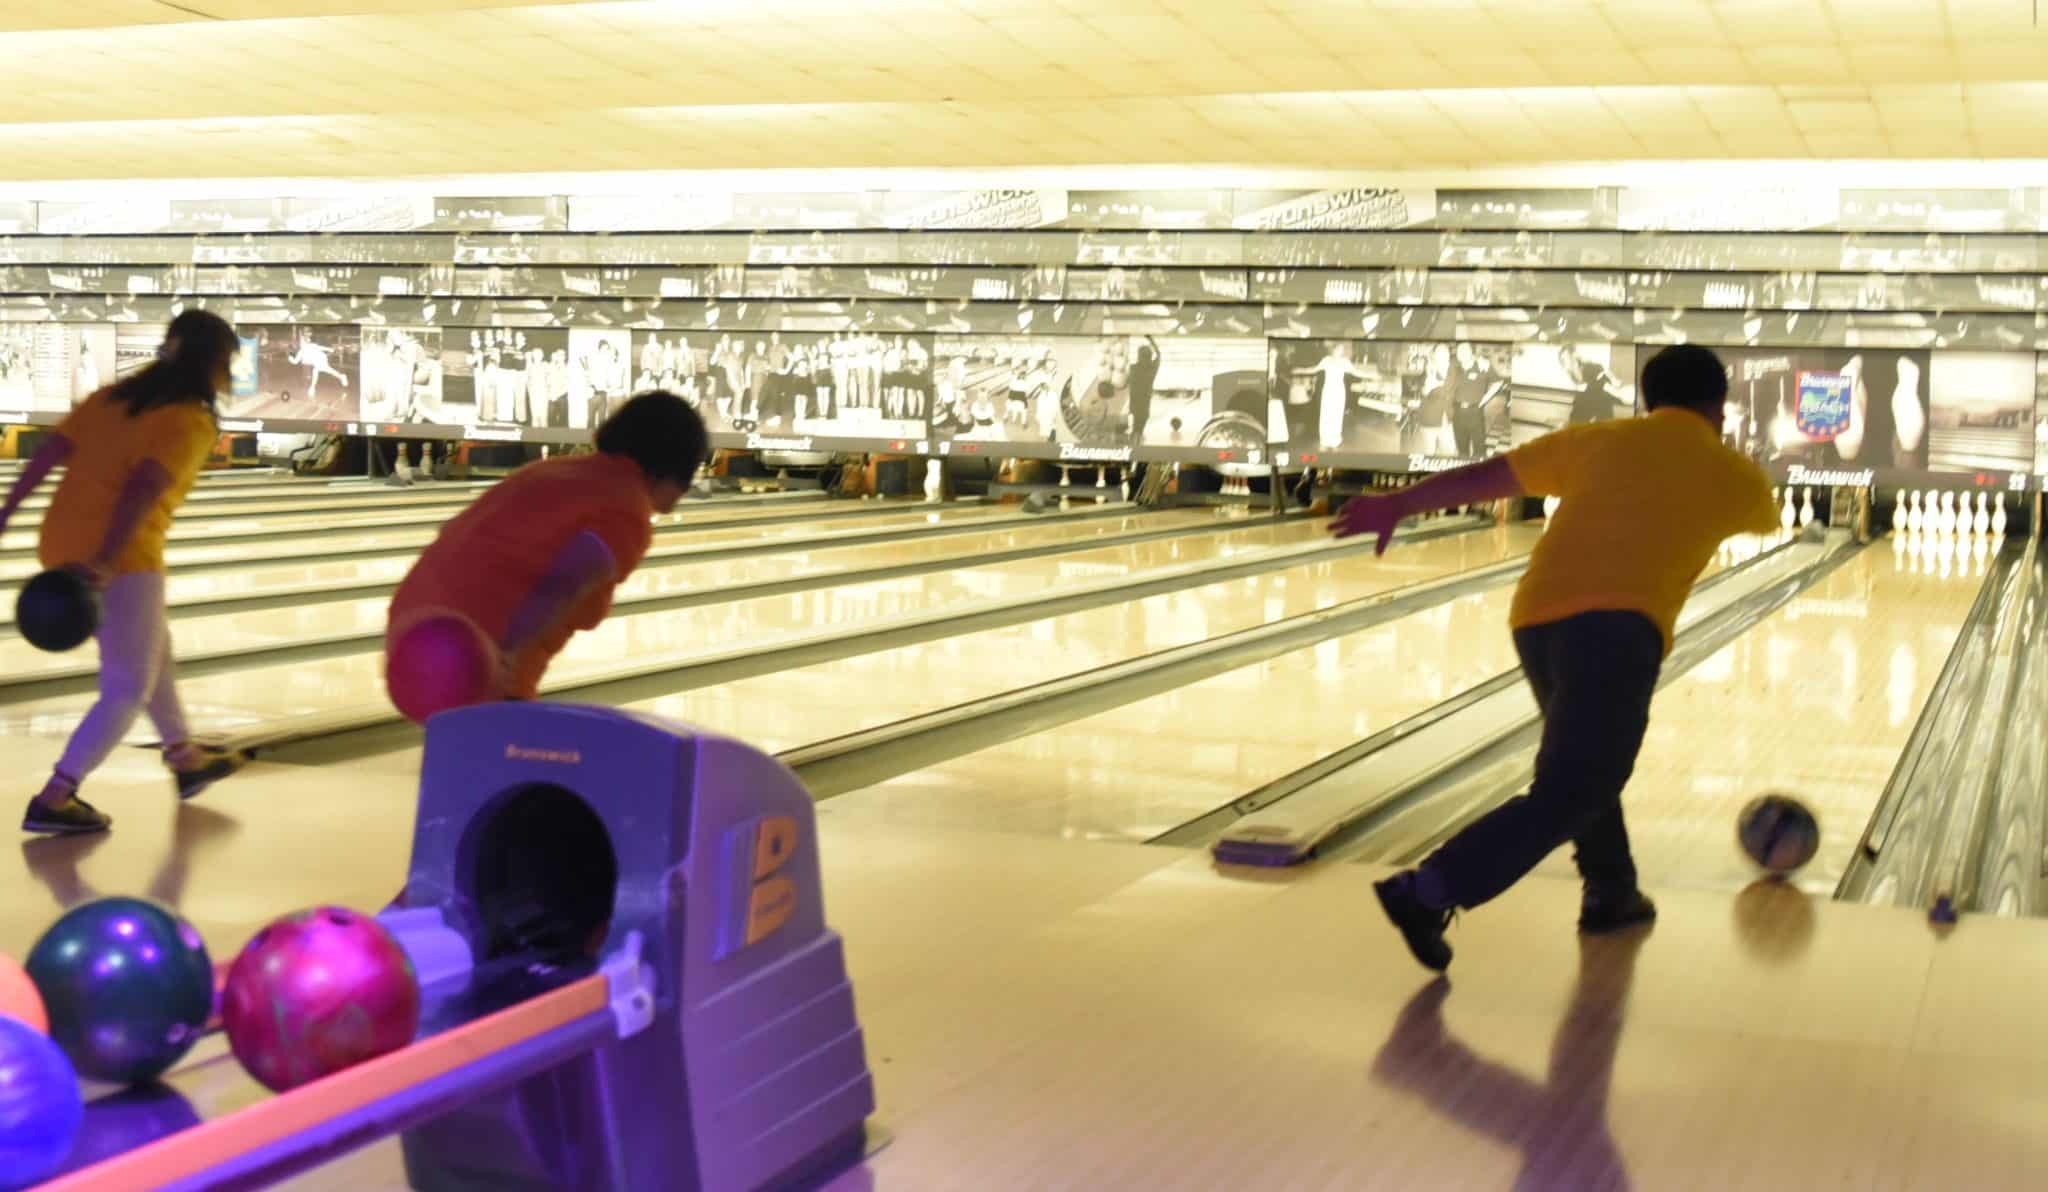 Bowling Masters wraps up in Italy South